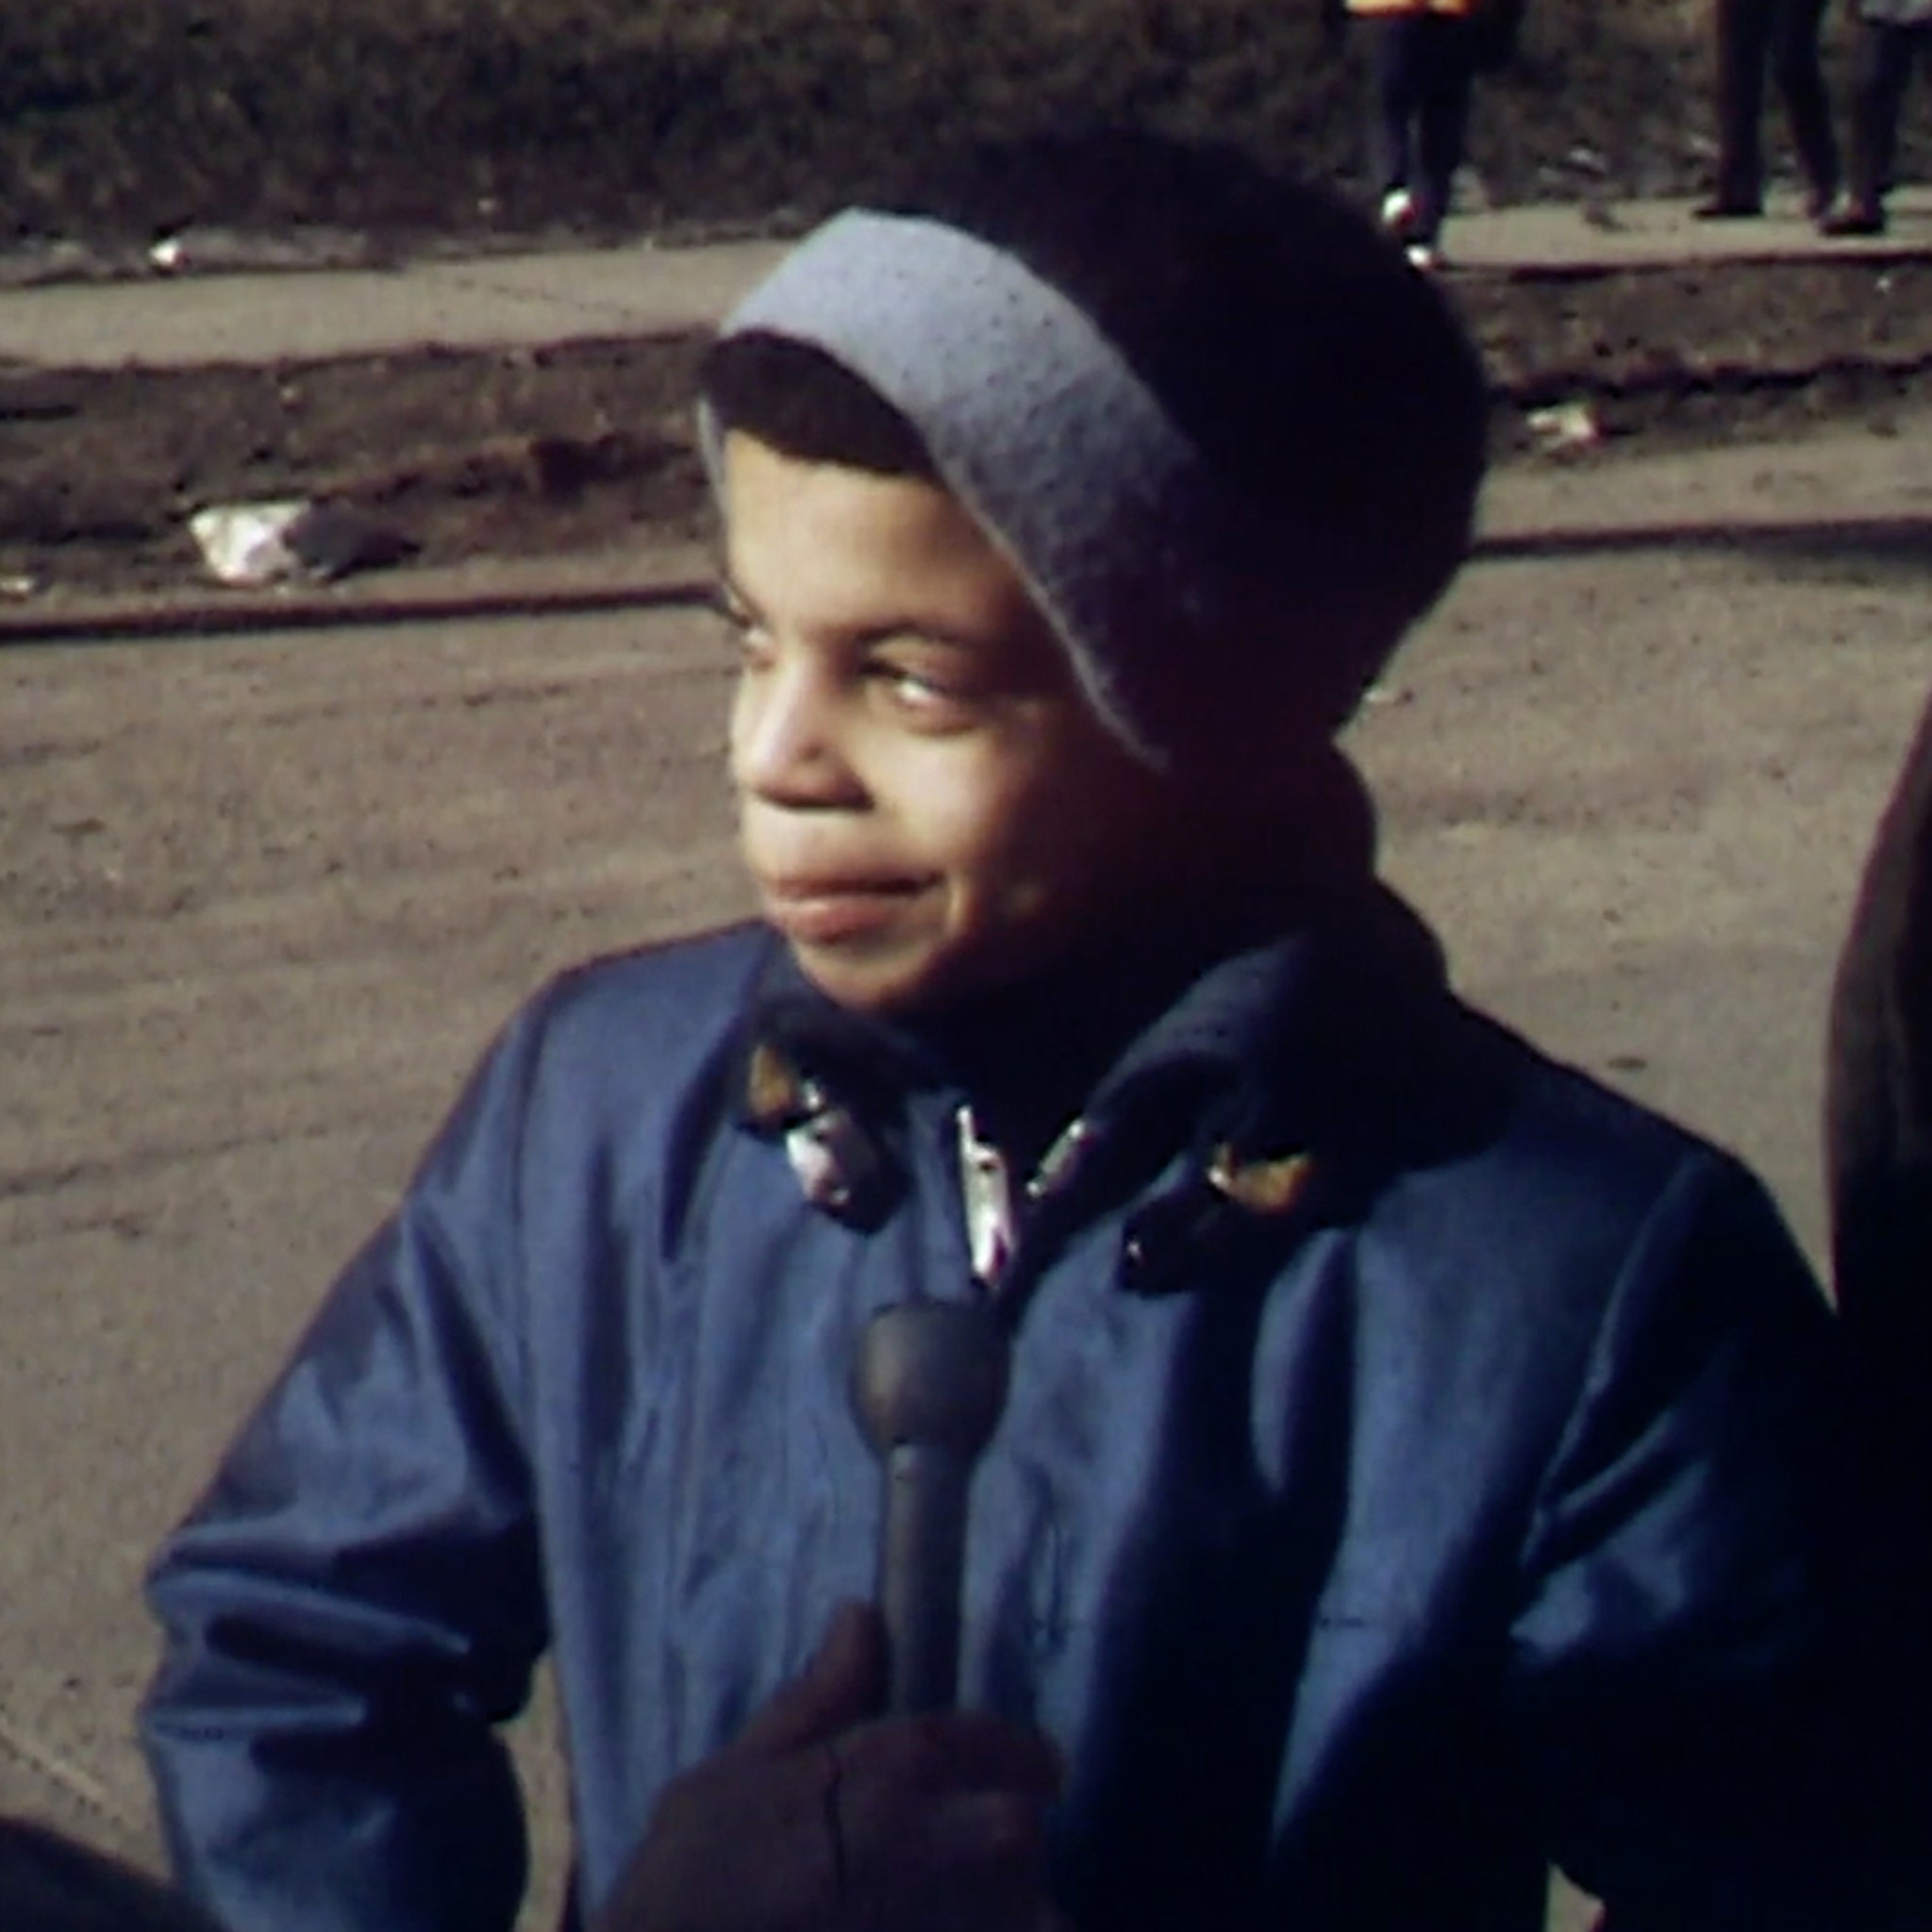 Prince at 11, Rare Childhood Footage Discovered in Minnesota News Archives pic